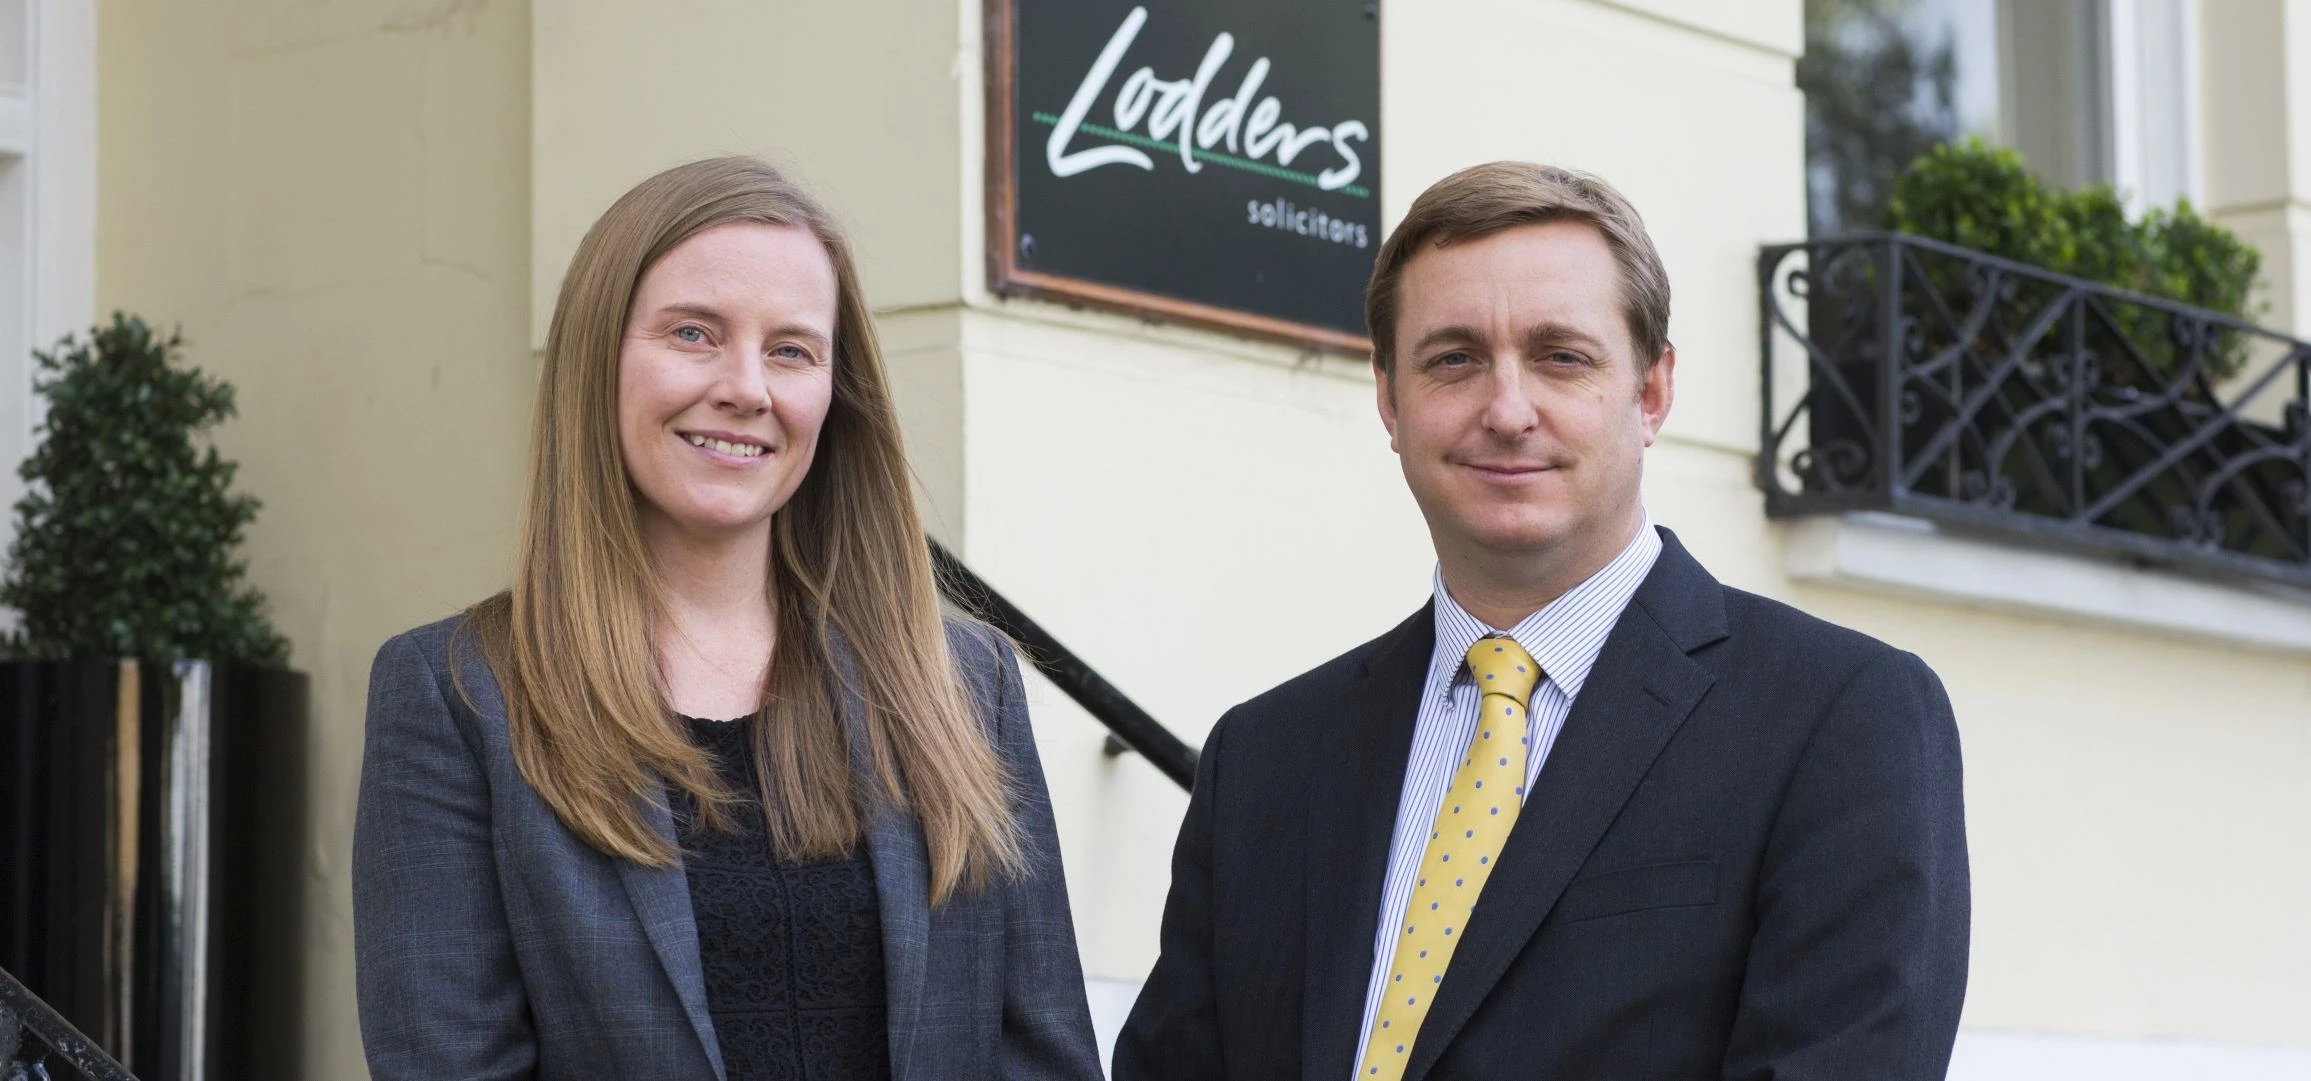 Wills, trusts, estates and probate legal specialist Jessica Beddows (left) with Paul Mourton, head o